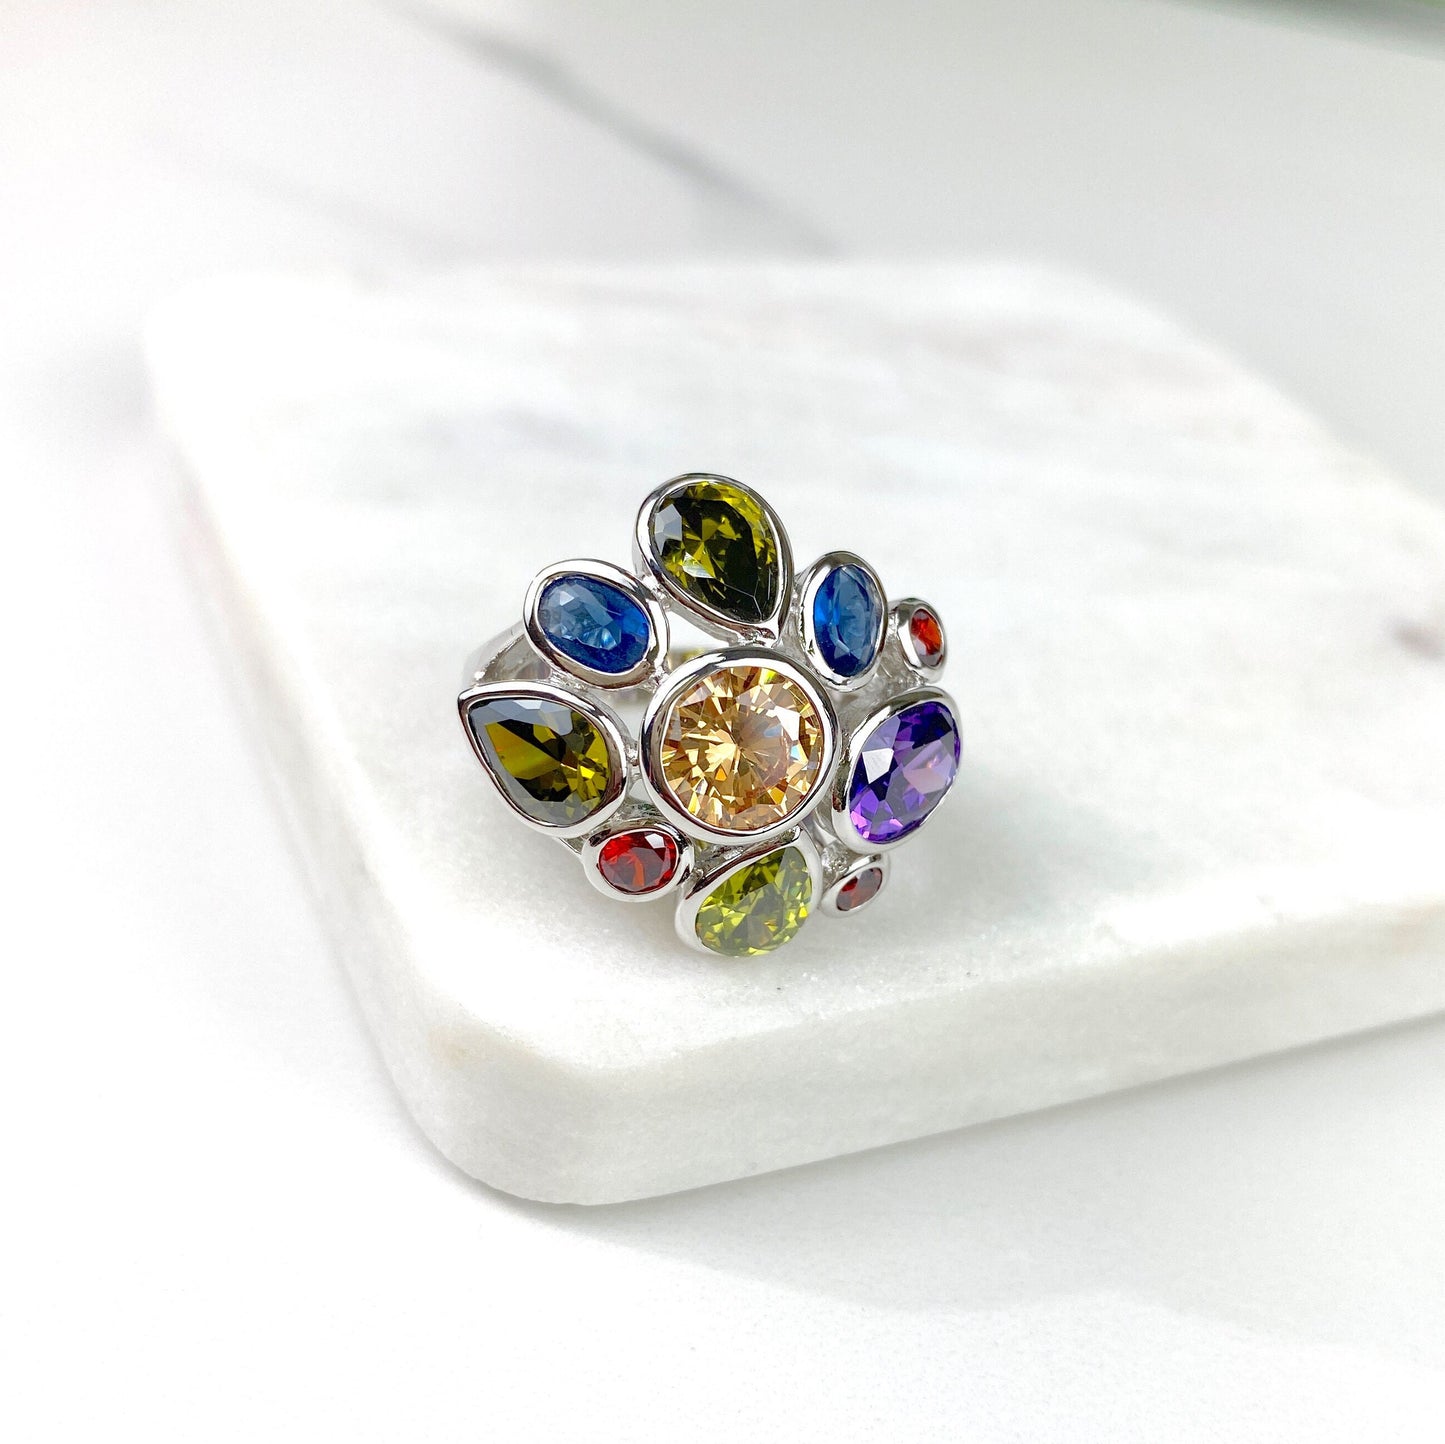 Silver Filled Colored Cubic Zirconia Flower Ring, Wholesale Jewelry Making Supplies